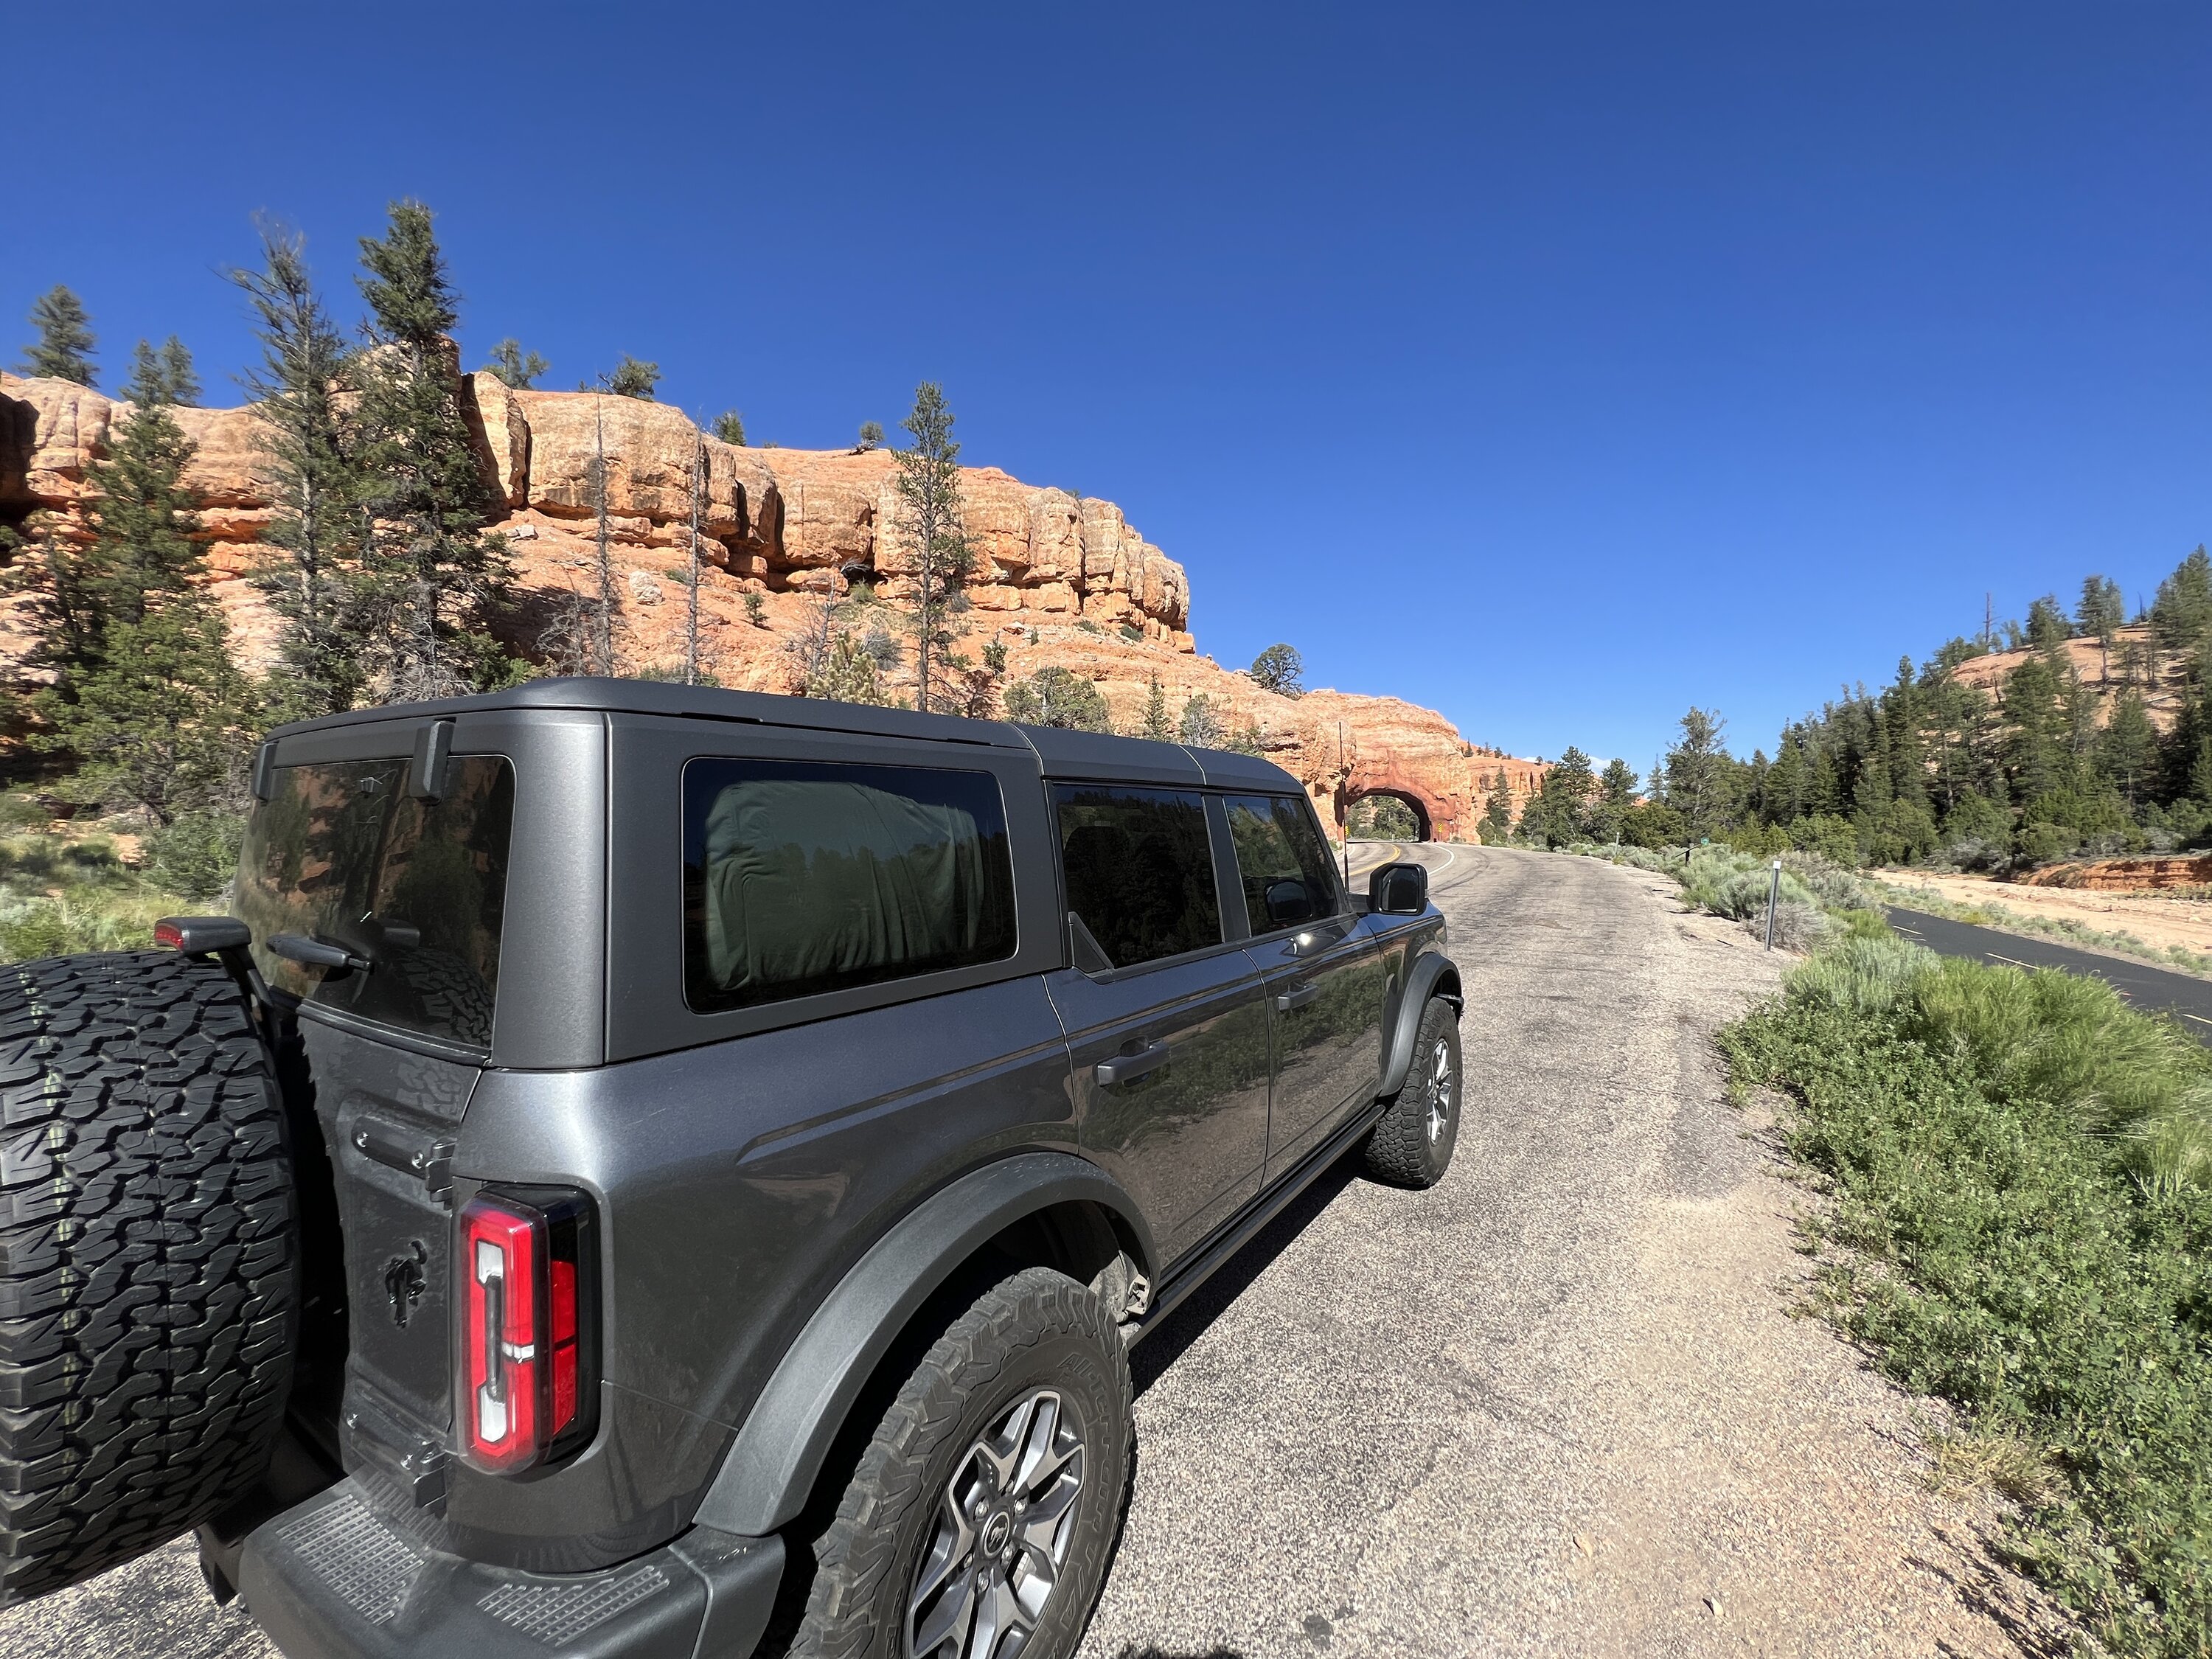 Ford Bronco Family Road Trip to Yellowstone via Bronco Turns into Quite an Adventure IMG_4911.JPG